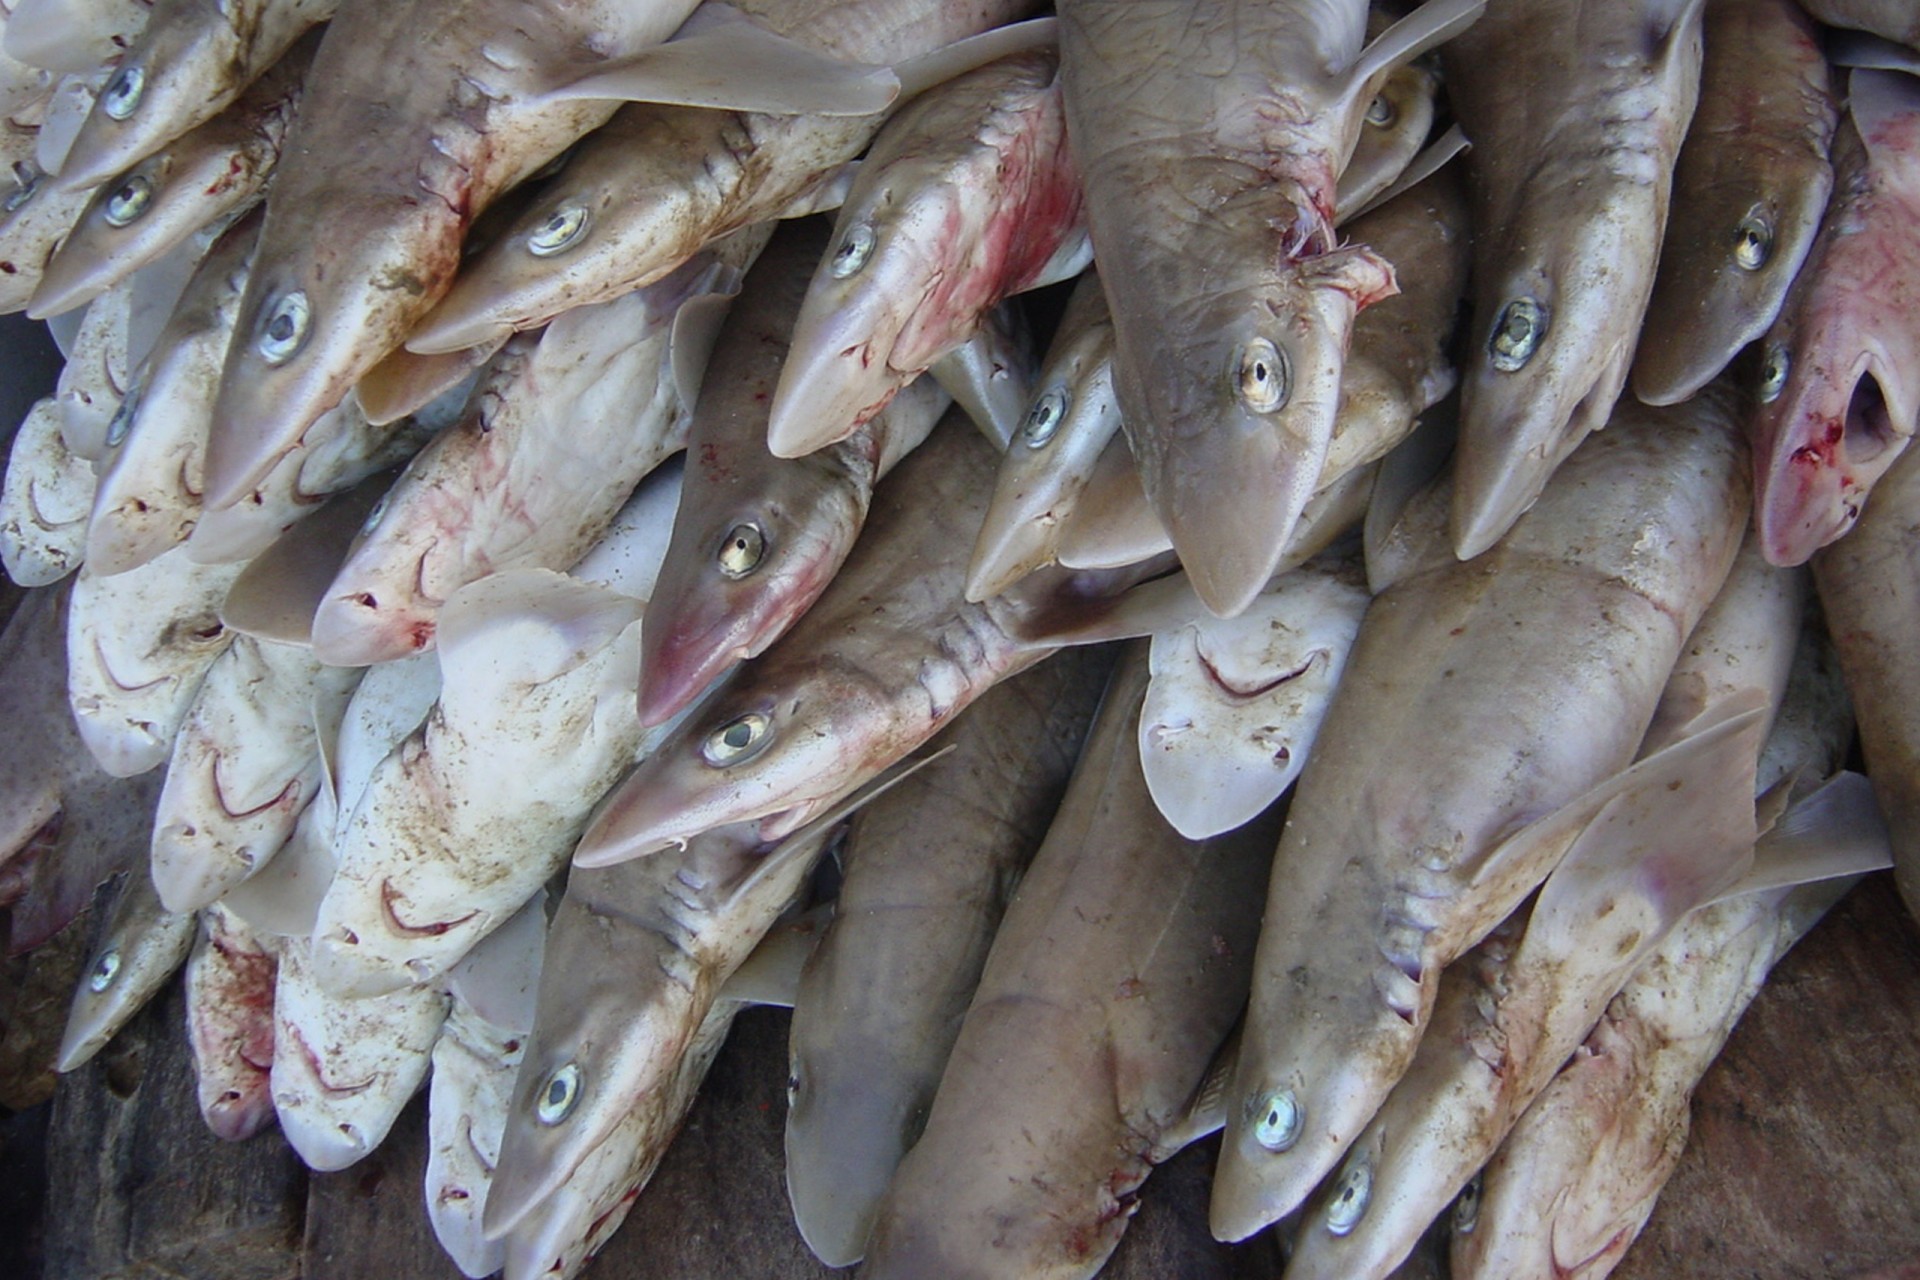 Fishing exclusion zones to help manage shark populations in Pacific Panama